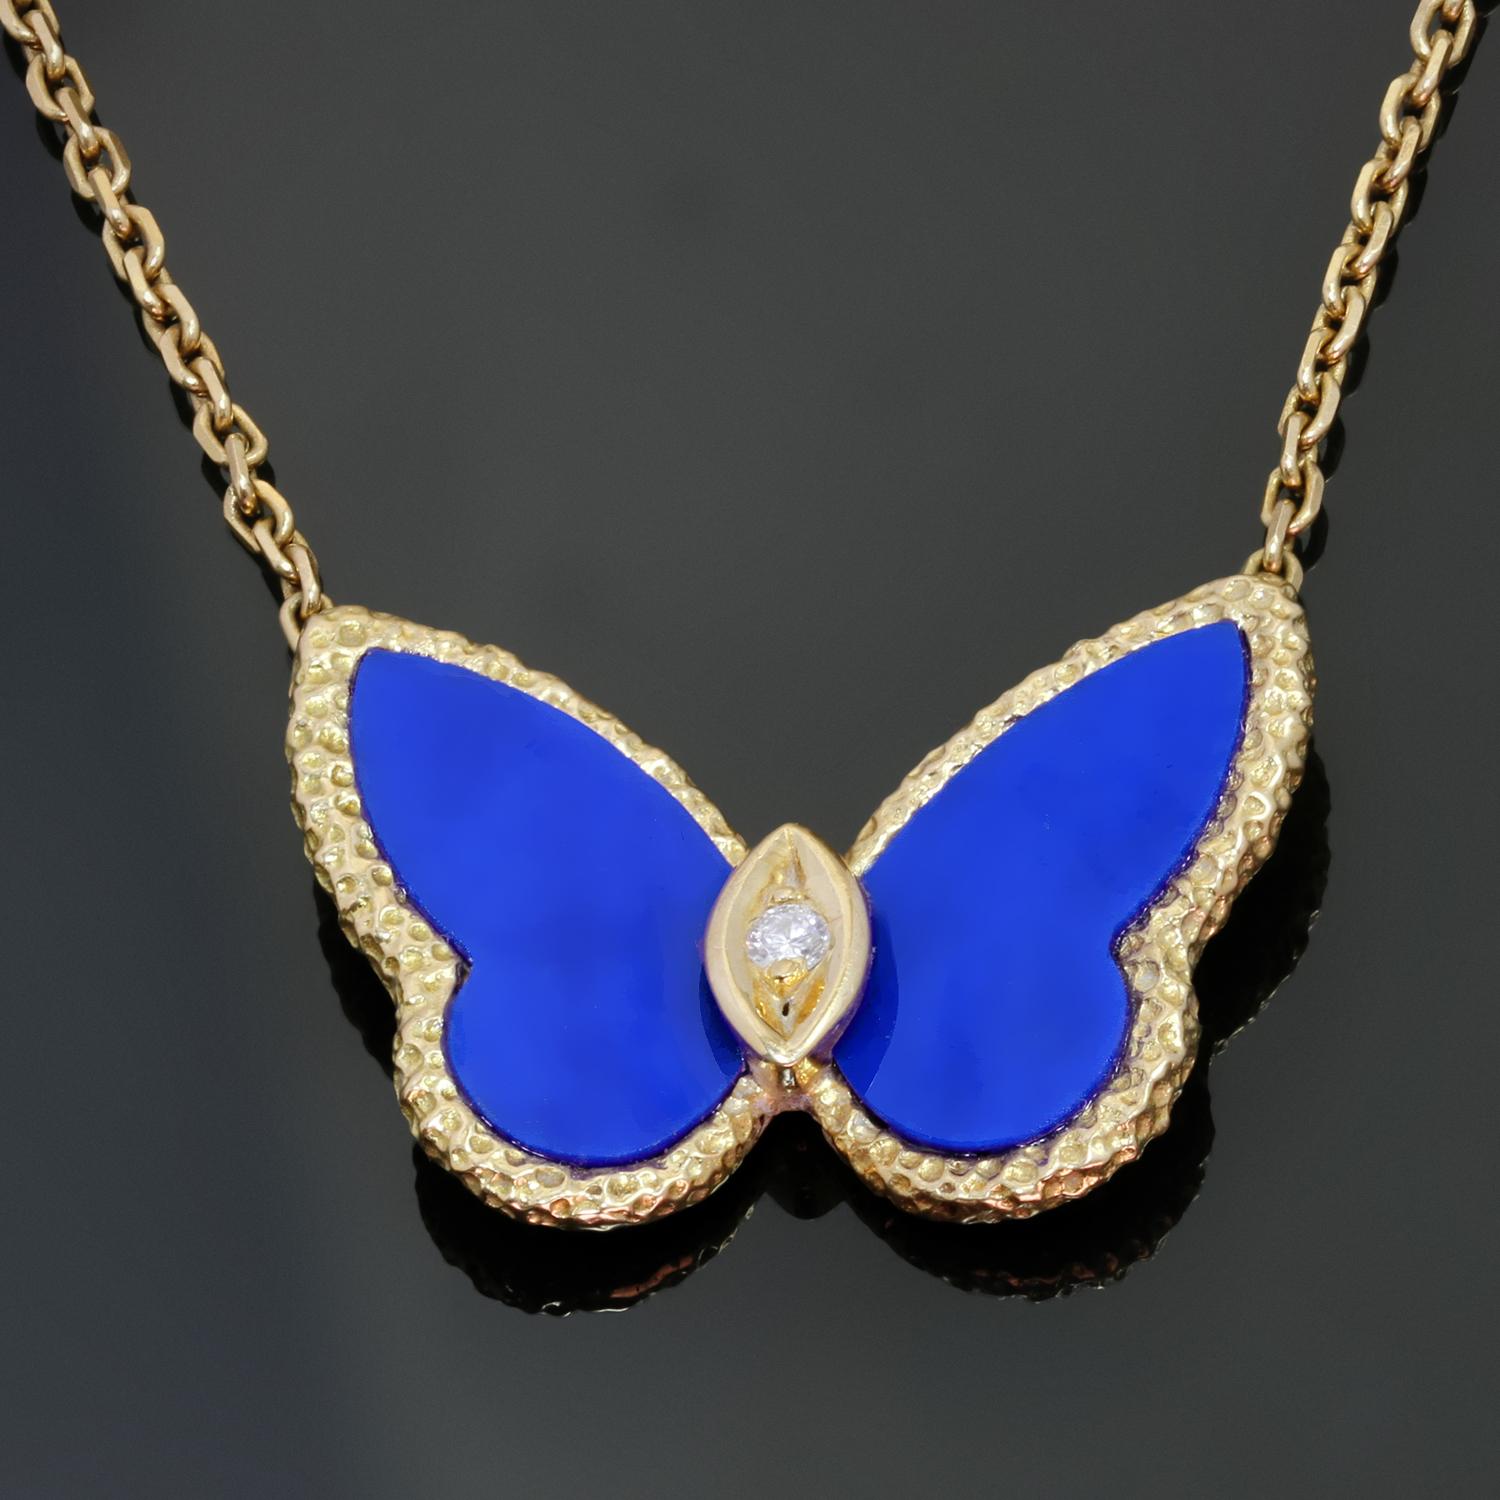 This stunning vintage Van Cleef & Arpels necklace from the iconic Flying Beauties collection is crafted in textured 18k yellow gold and features a 12mm x 24mm butterfly pendant accented with blue lapis lazuli wings and a solitaire brilliant-cut